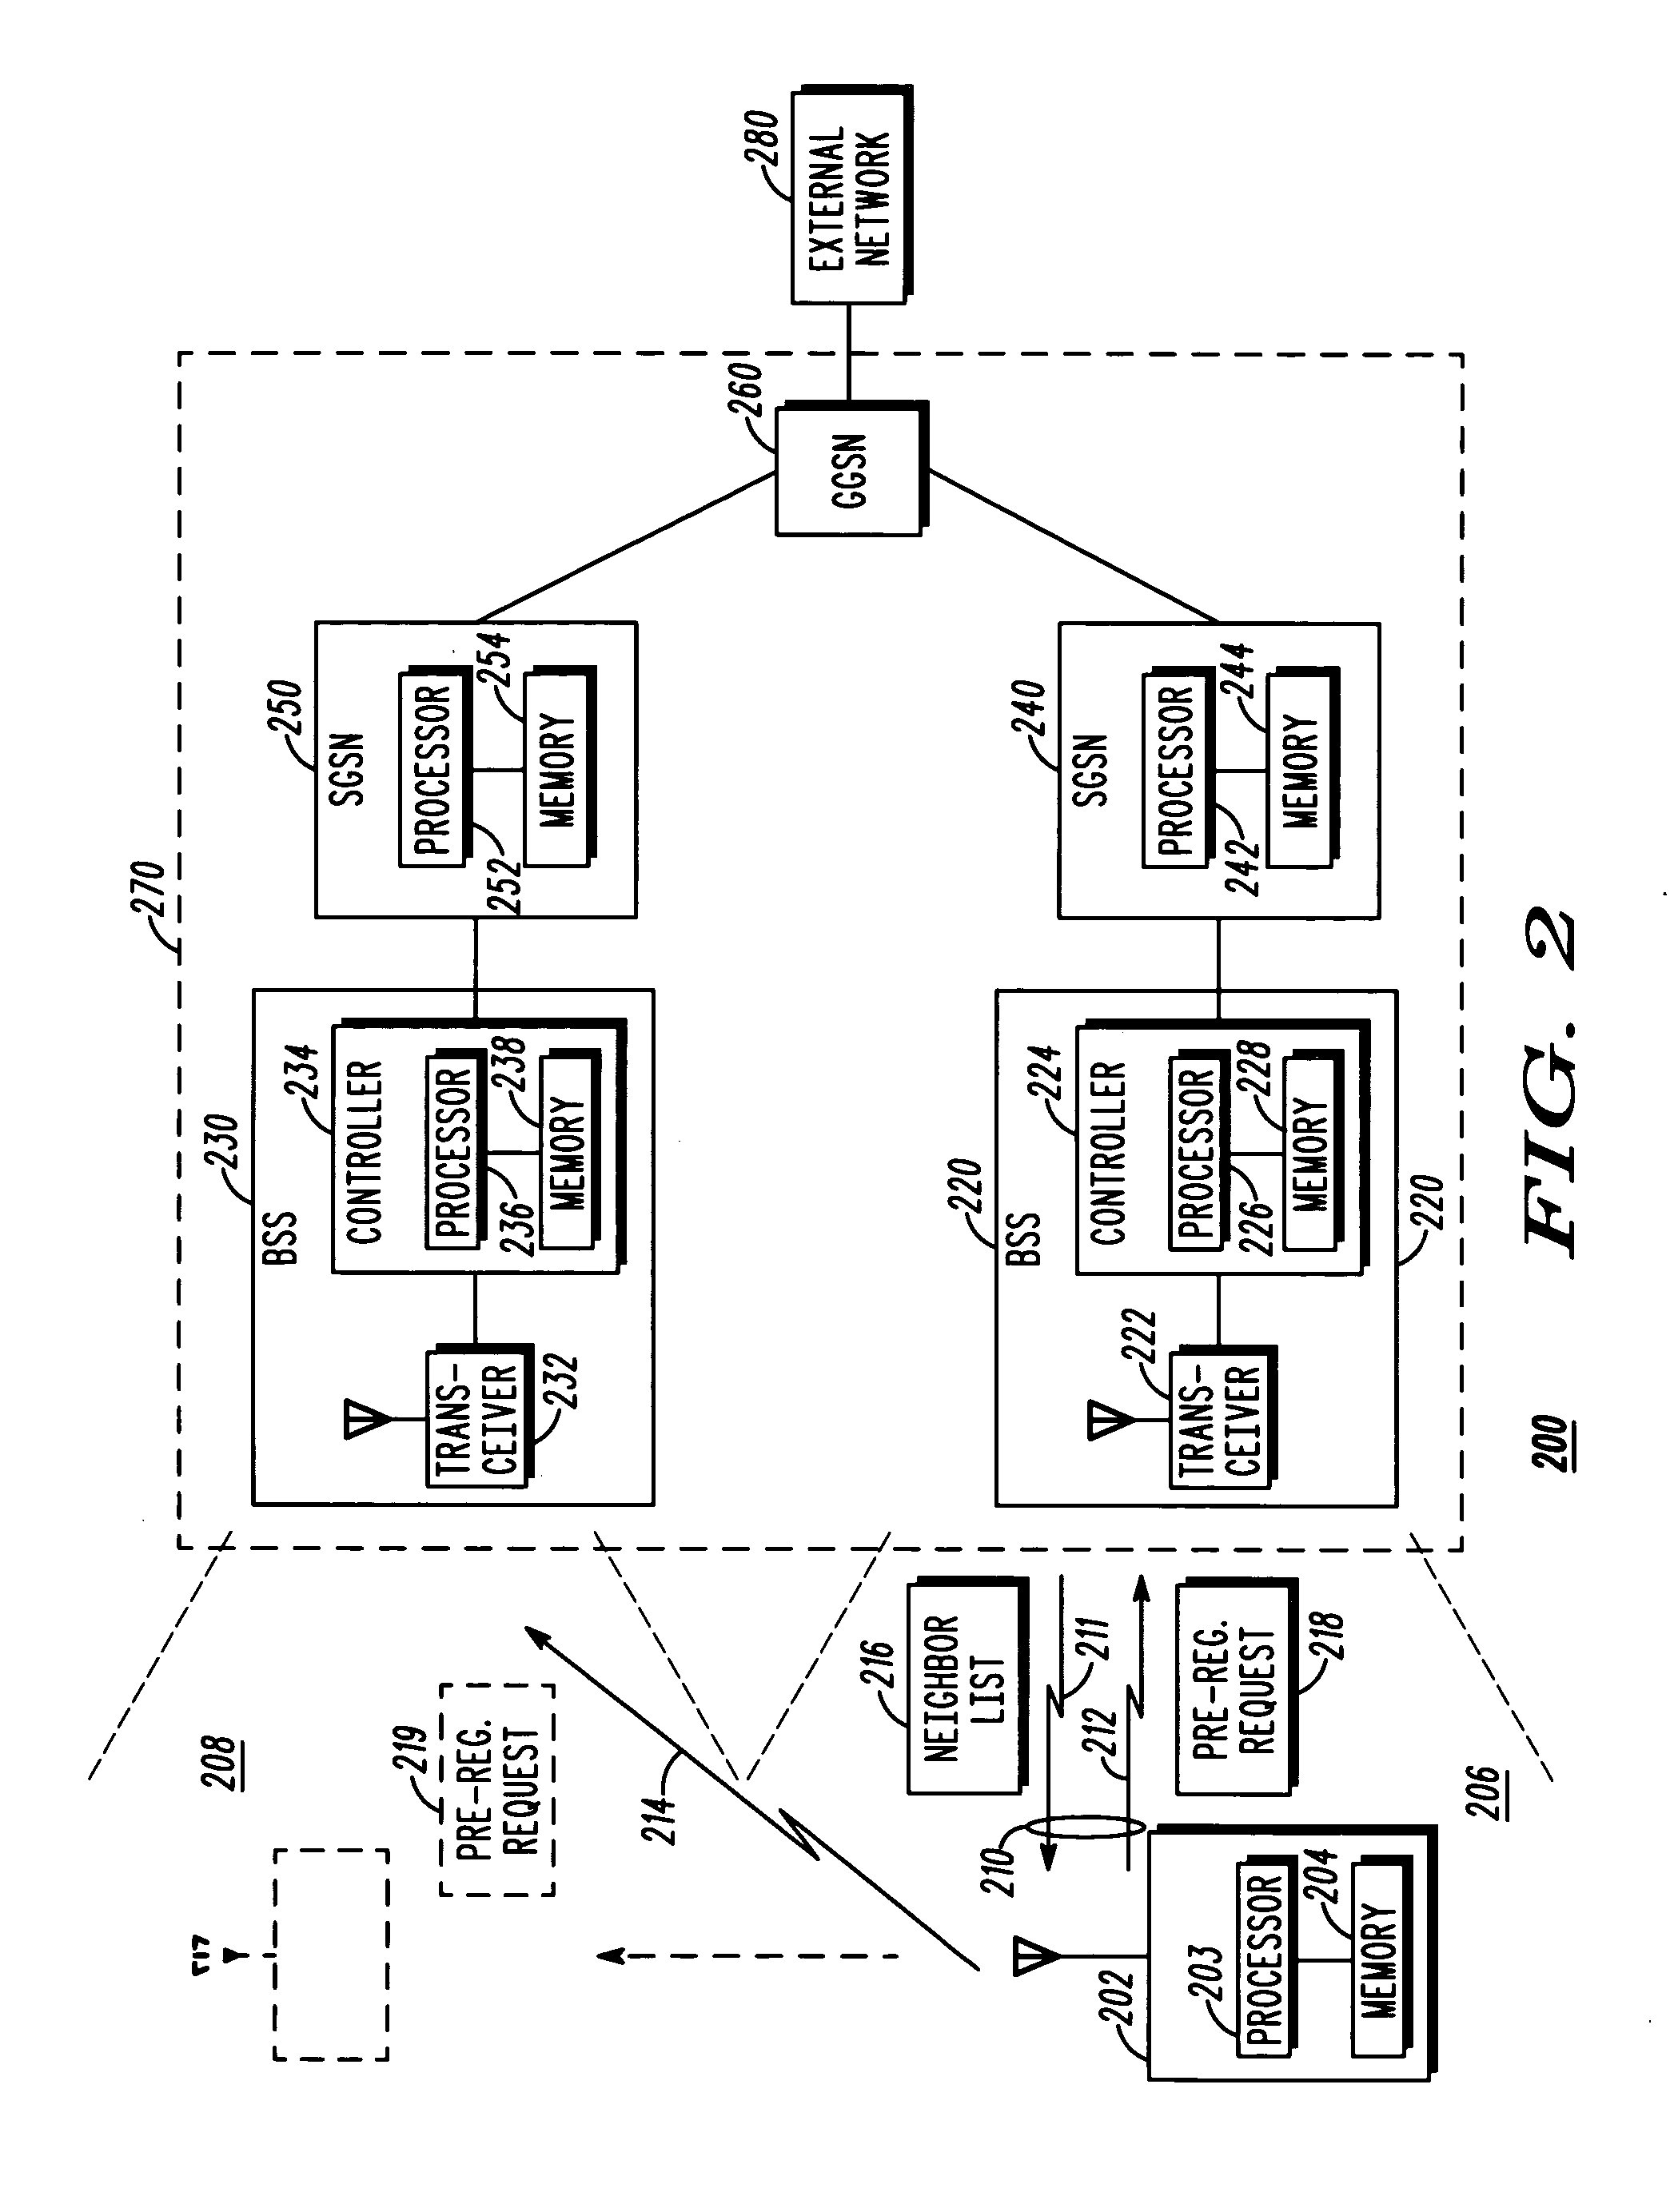 Method and apparatus for mobile station registration in a cellular communication system